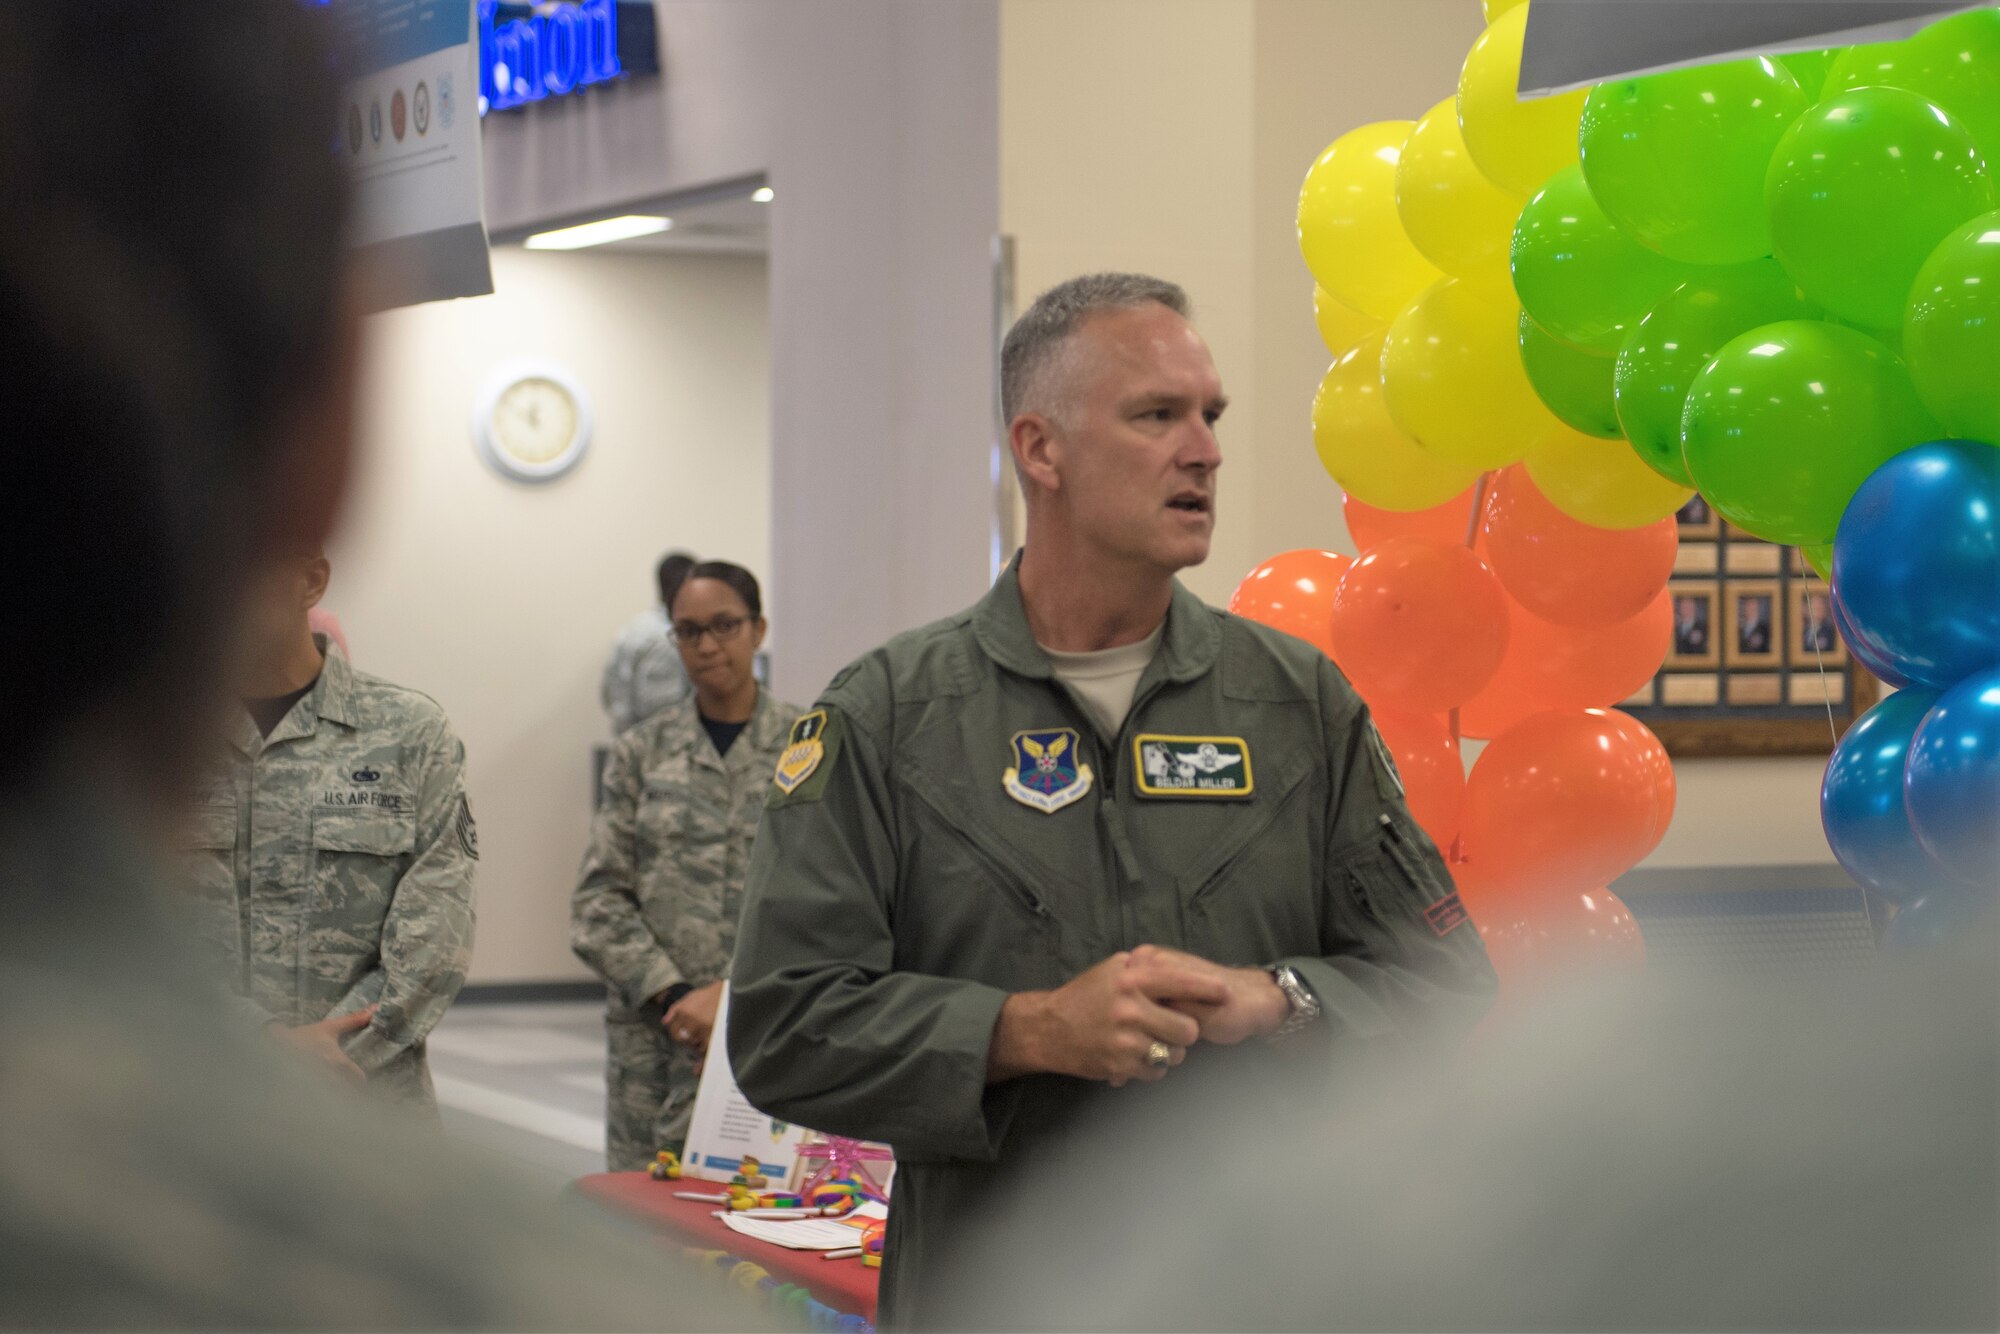 Col. Michael Miller, 2nd Bomb Wing commander, speaks during Barksdale's LGBT Pride Month event, June 22, 2018. (U.S. Air Force photo by Tech. Sgt. Daniel Martinez)